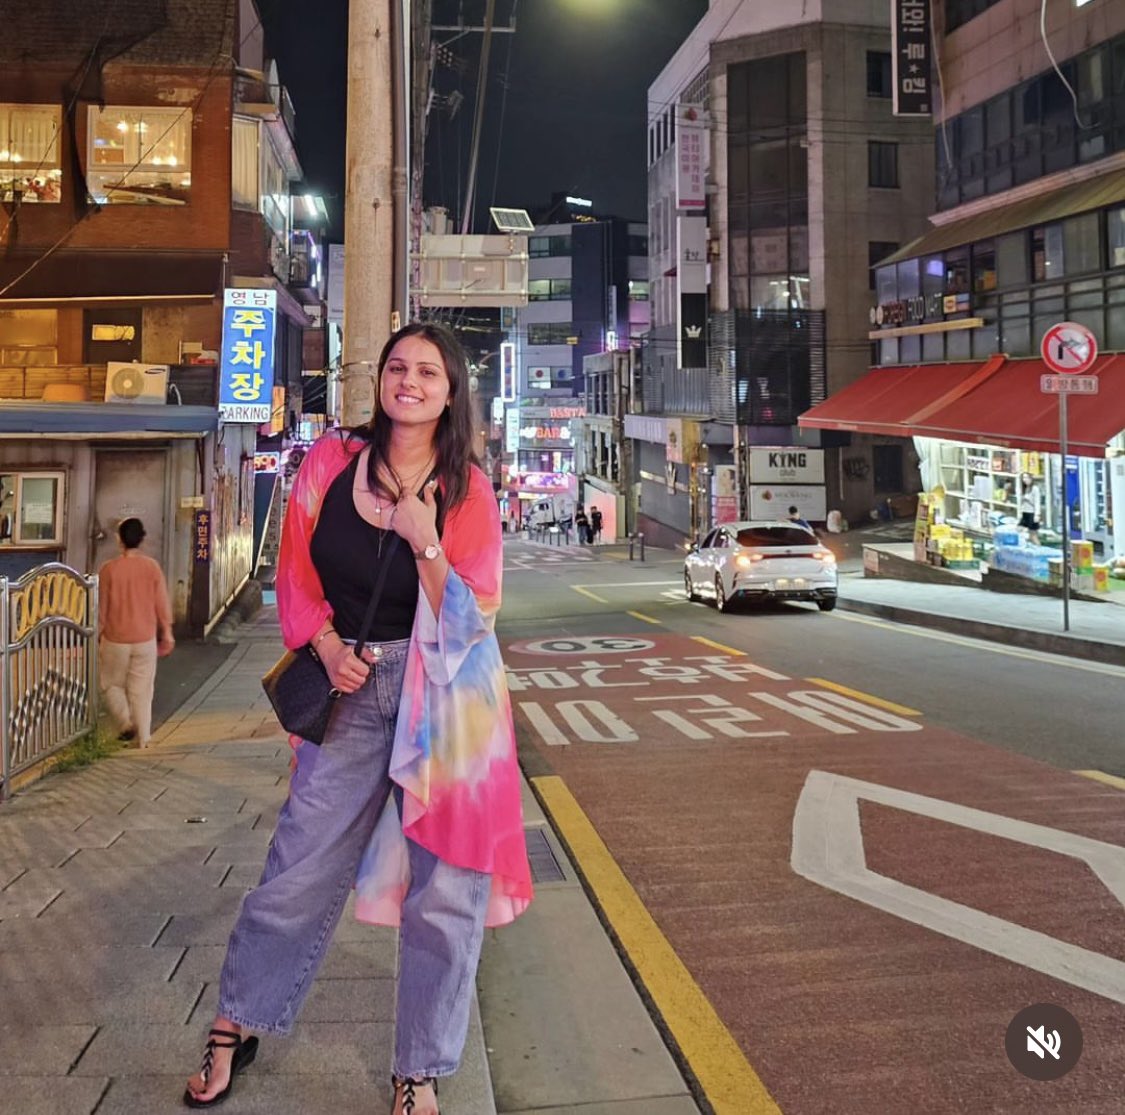 Lost in the neon glow of Seoul's vibrant nightscape 💫 🌃  #SeoulDreams #CityNights